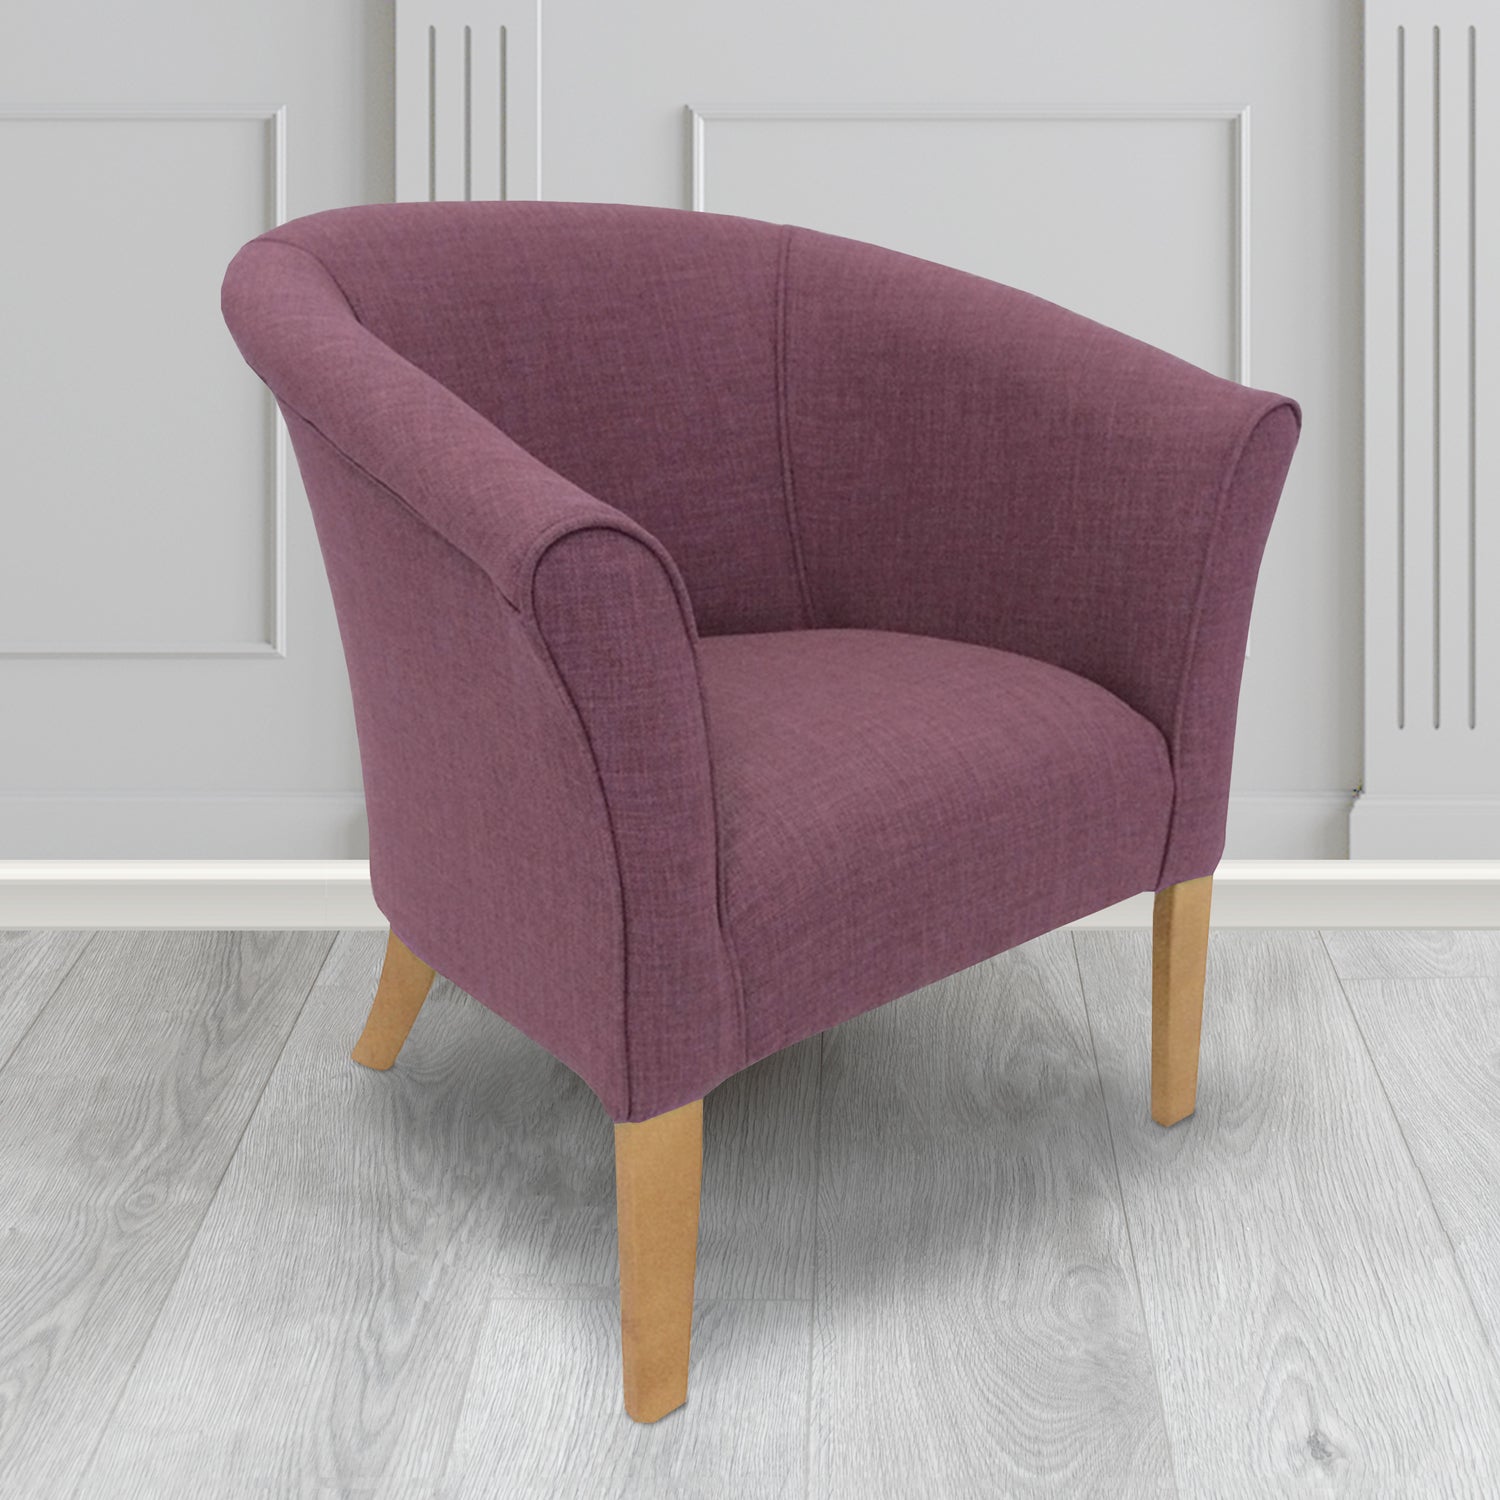 Quill Tub Chair in Linetta Grape Crib 5 Plain Fabric - Antimicrobial, Stain Resistant & Waterproof - The Tub Chair Shop